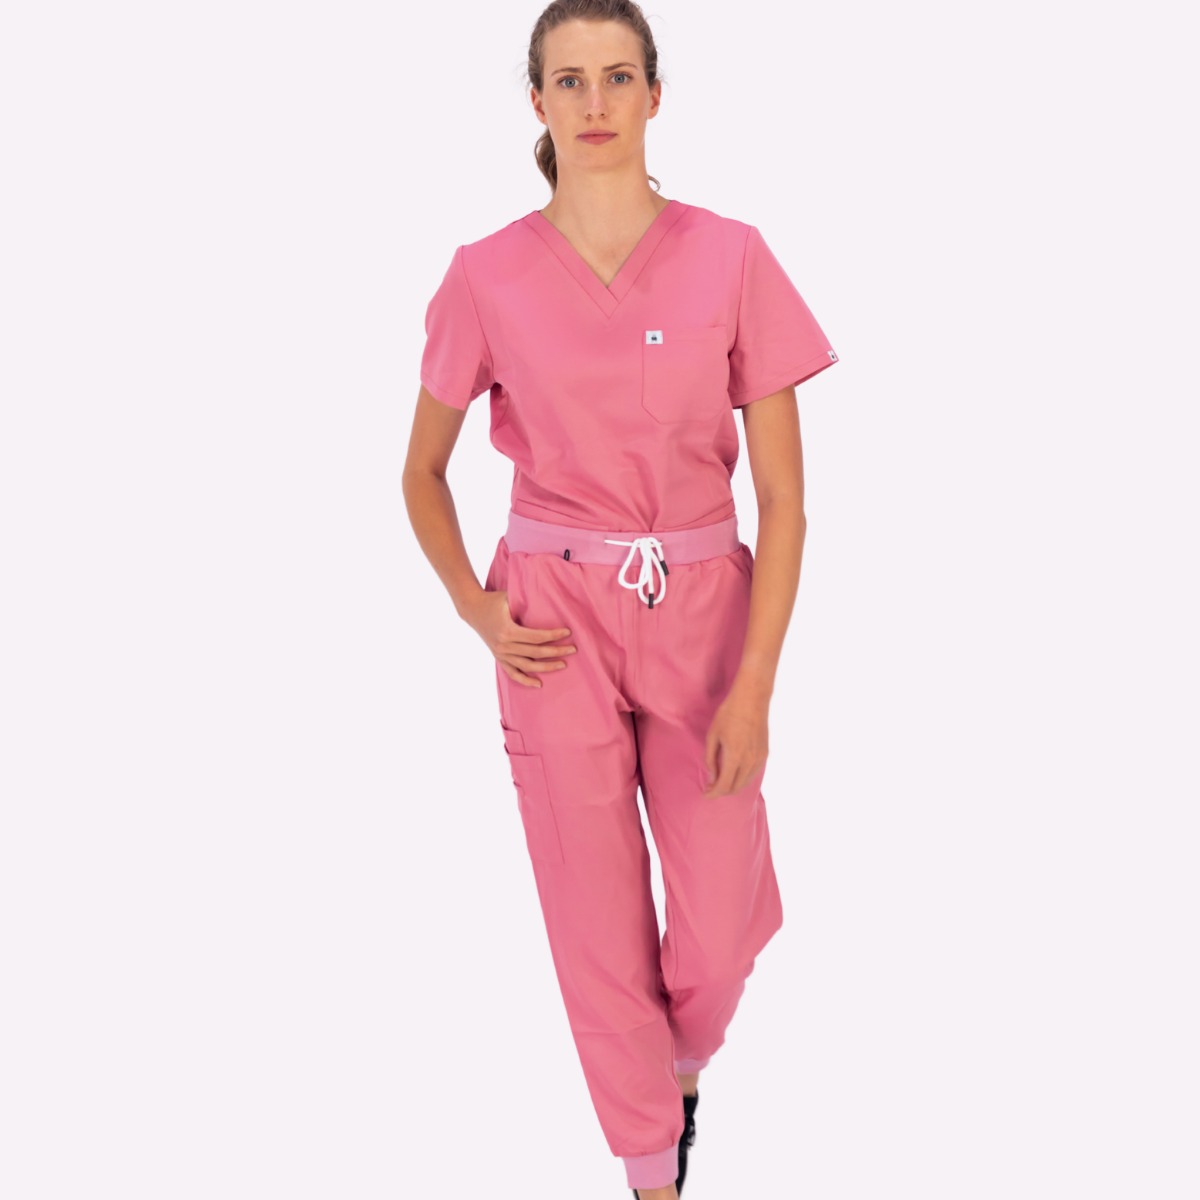 Meredith 2.0 Jogger Pants Clearance - Scrubber Duck